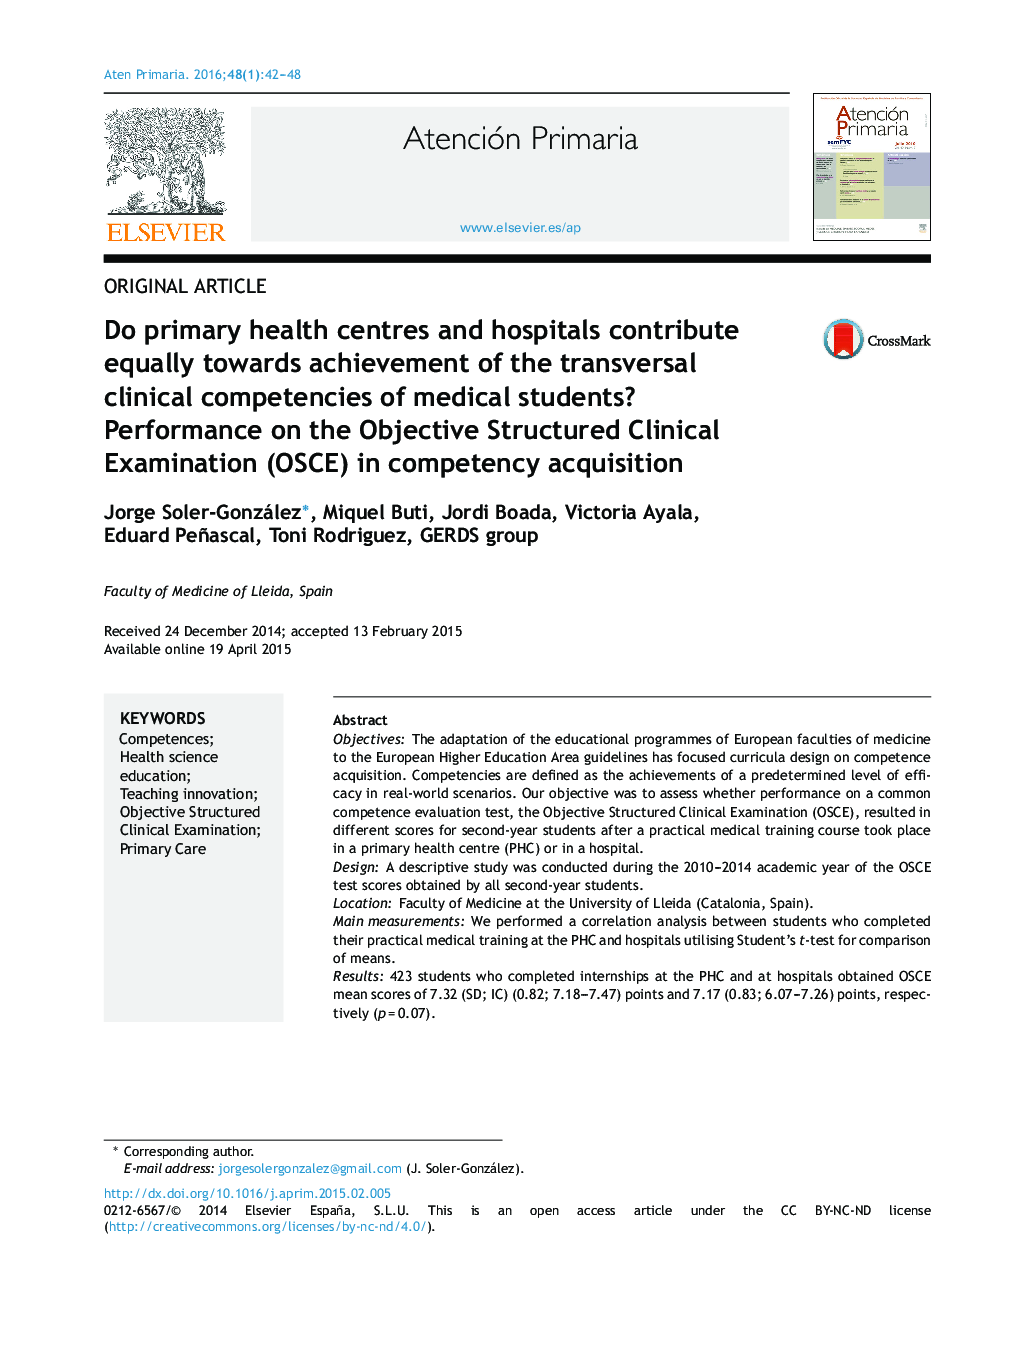 Do primary health centres and hospitals contribute equally towards achievement of the transversal clinical competencies of medical students? Performance on the Objective Structured Clinical Examination (OSCE) in competency acquisition